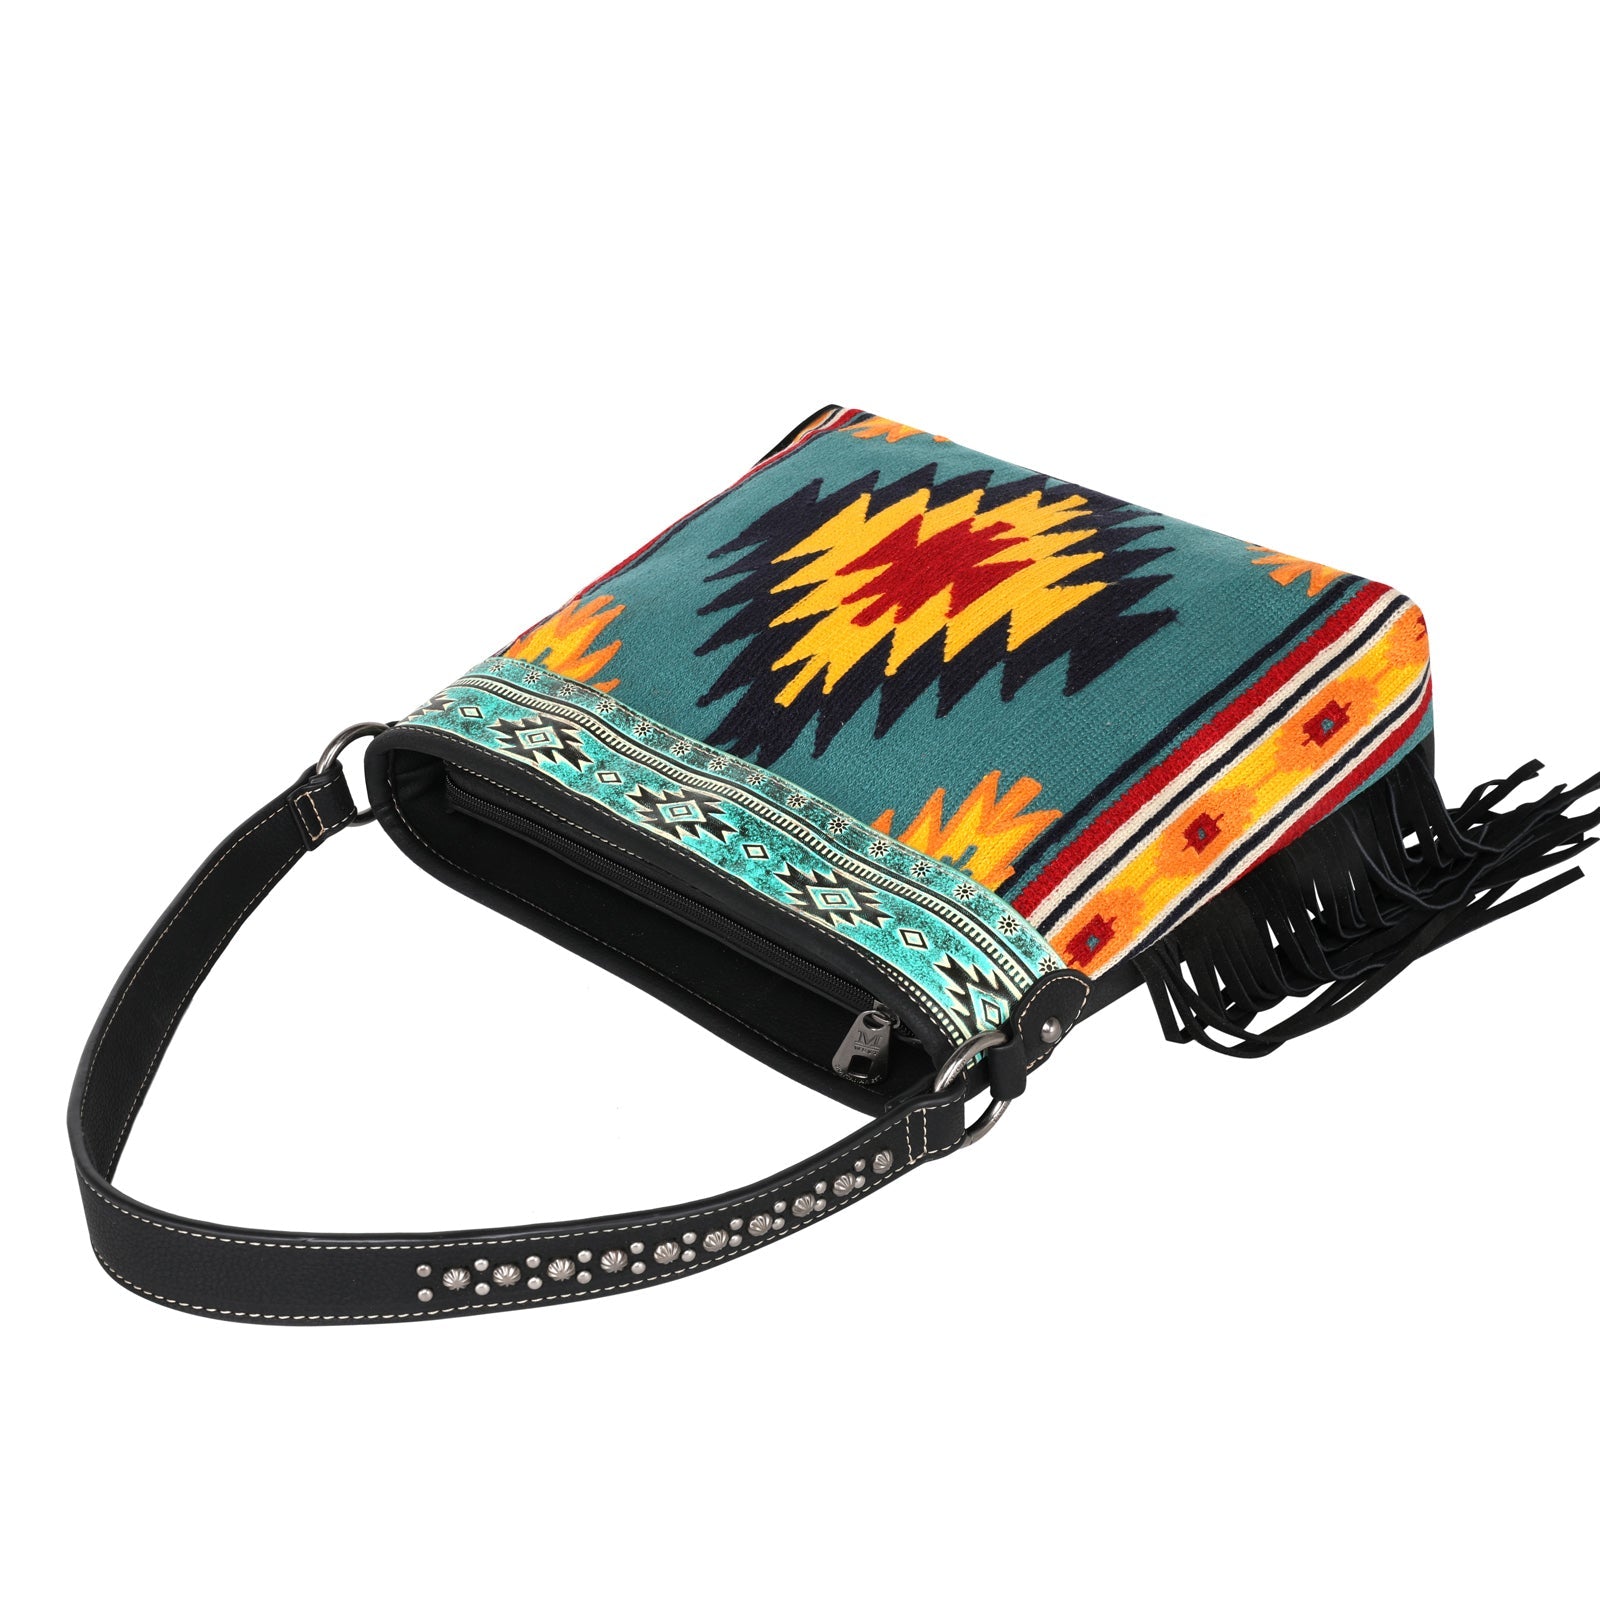 Montana West Aztec Tapestry Concealed Carry Hobo - Cowgirl Wear